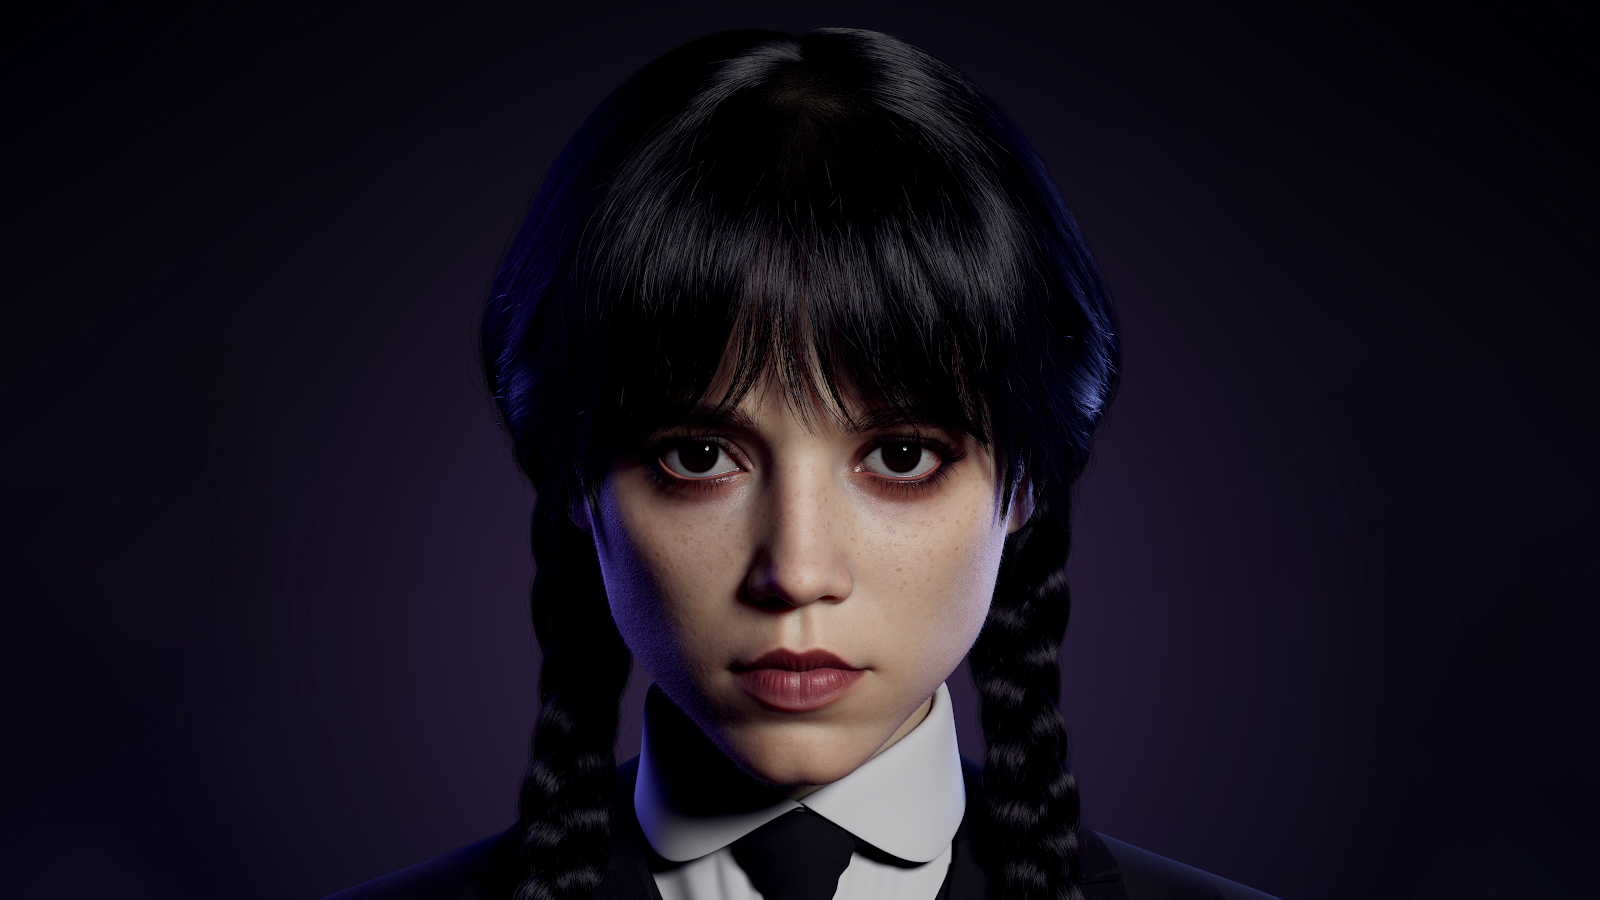 WEDNESDAY ADDAMS WALLPAPER FOR PC